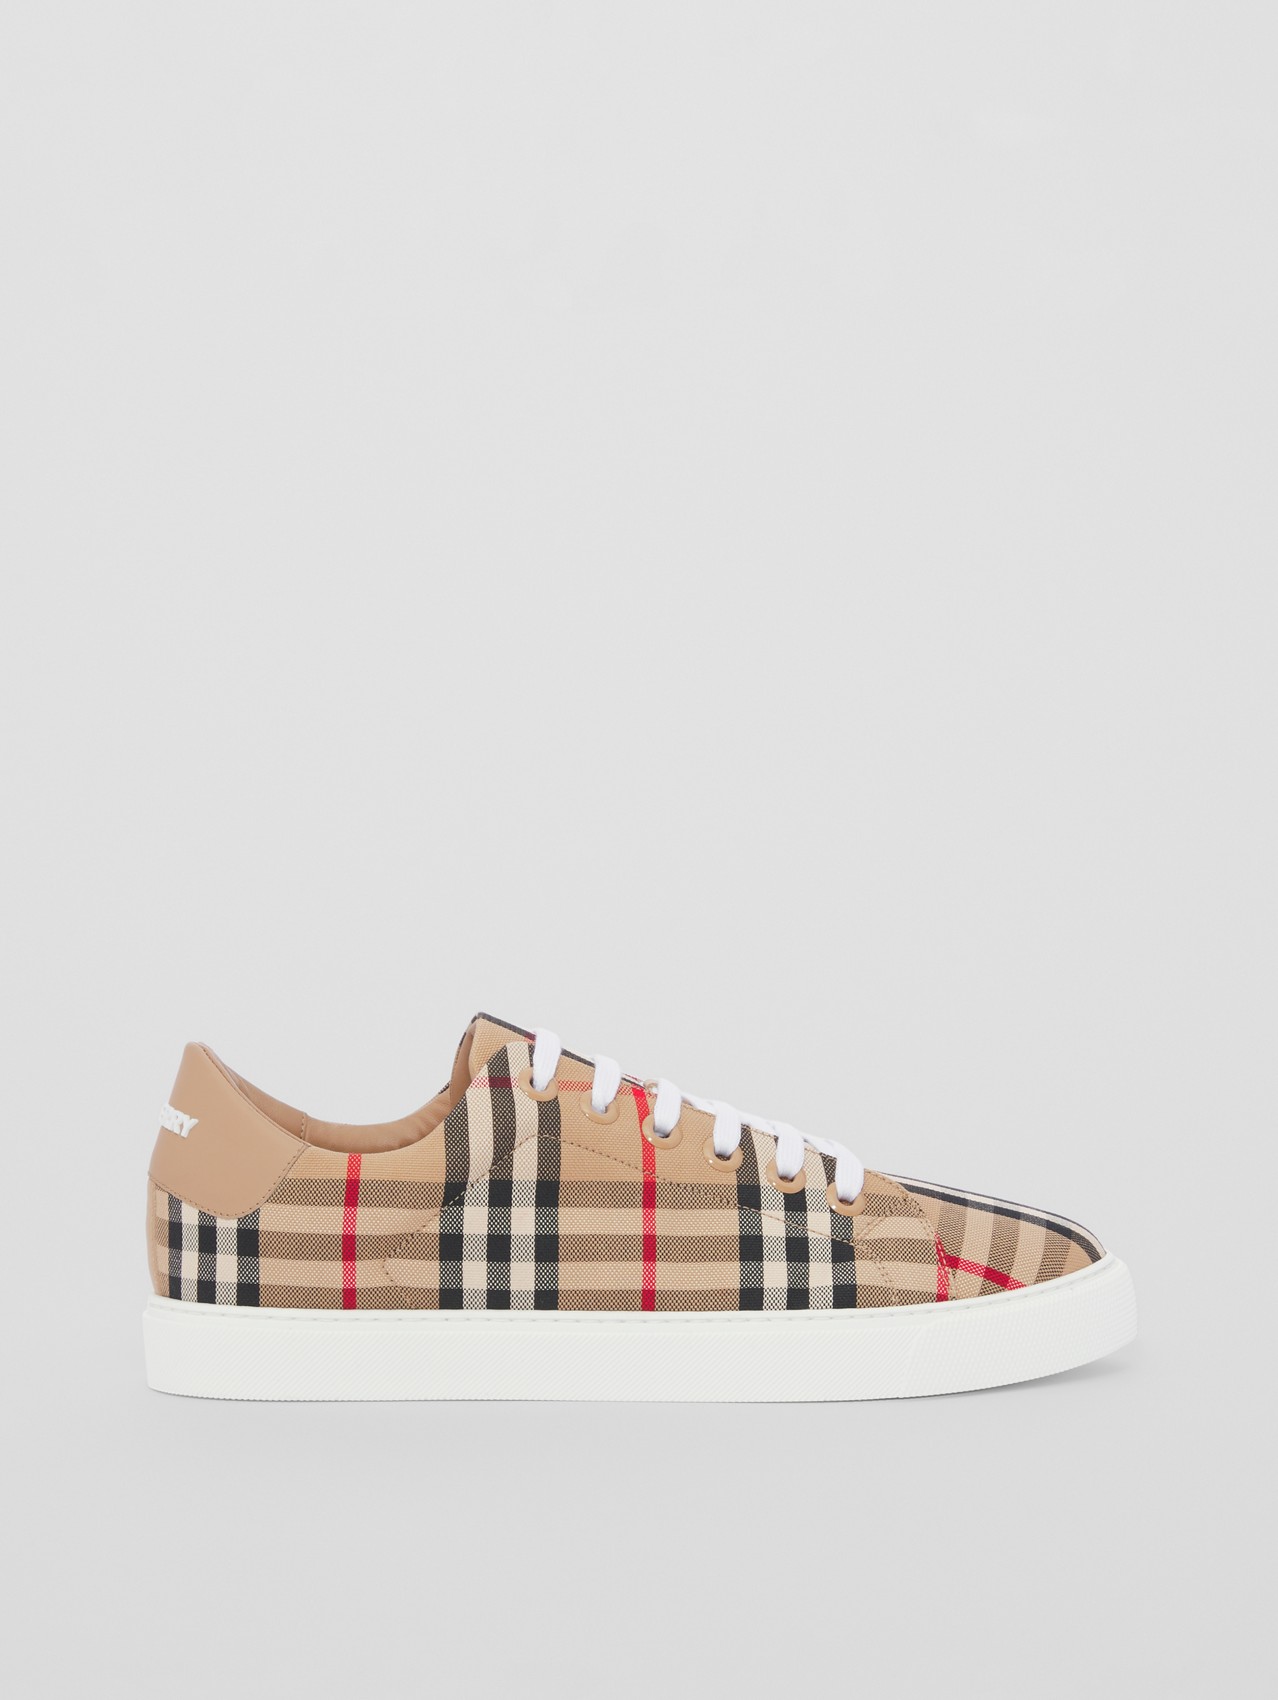 Vintage Check and Leather Sneakers in Archive Beige